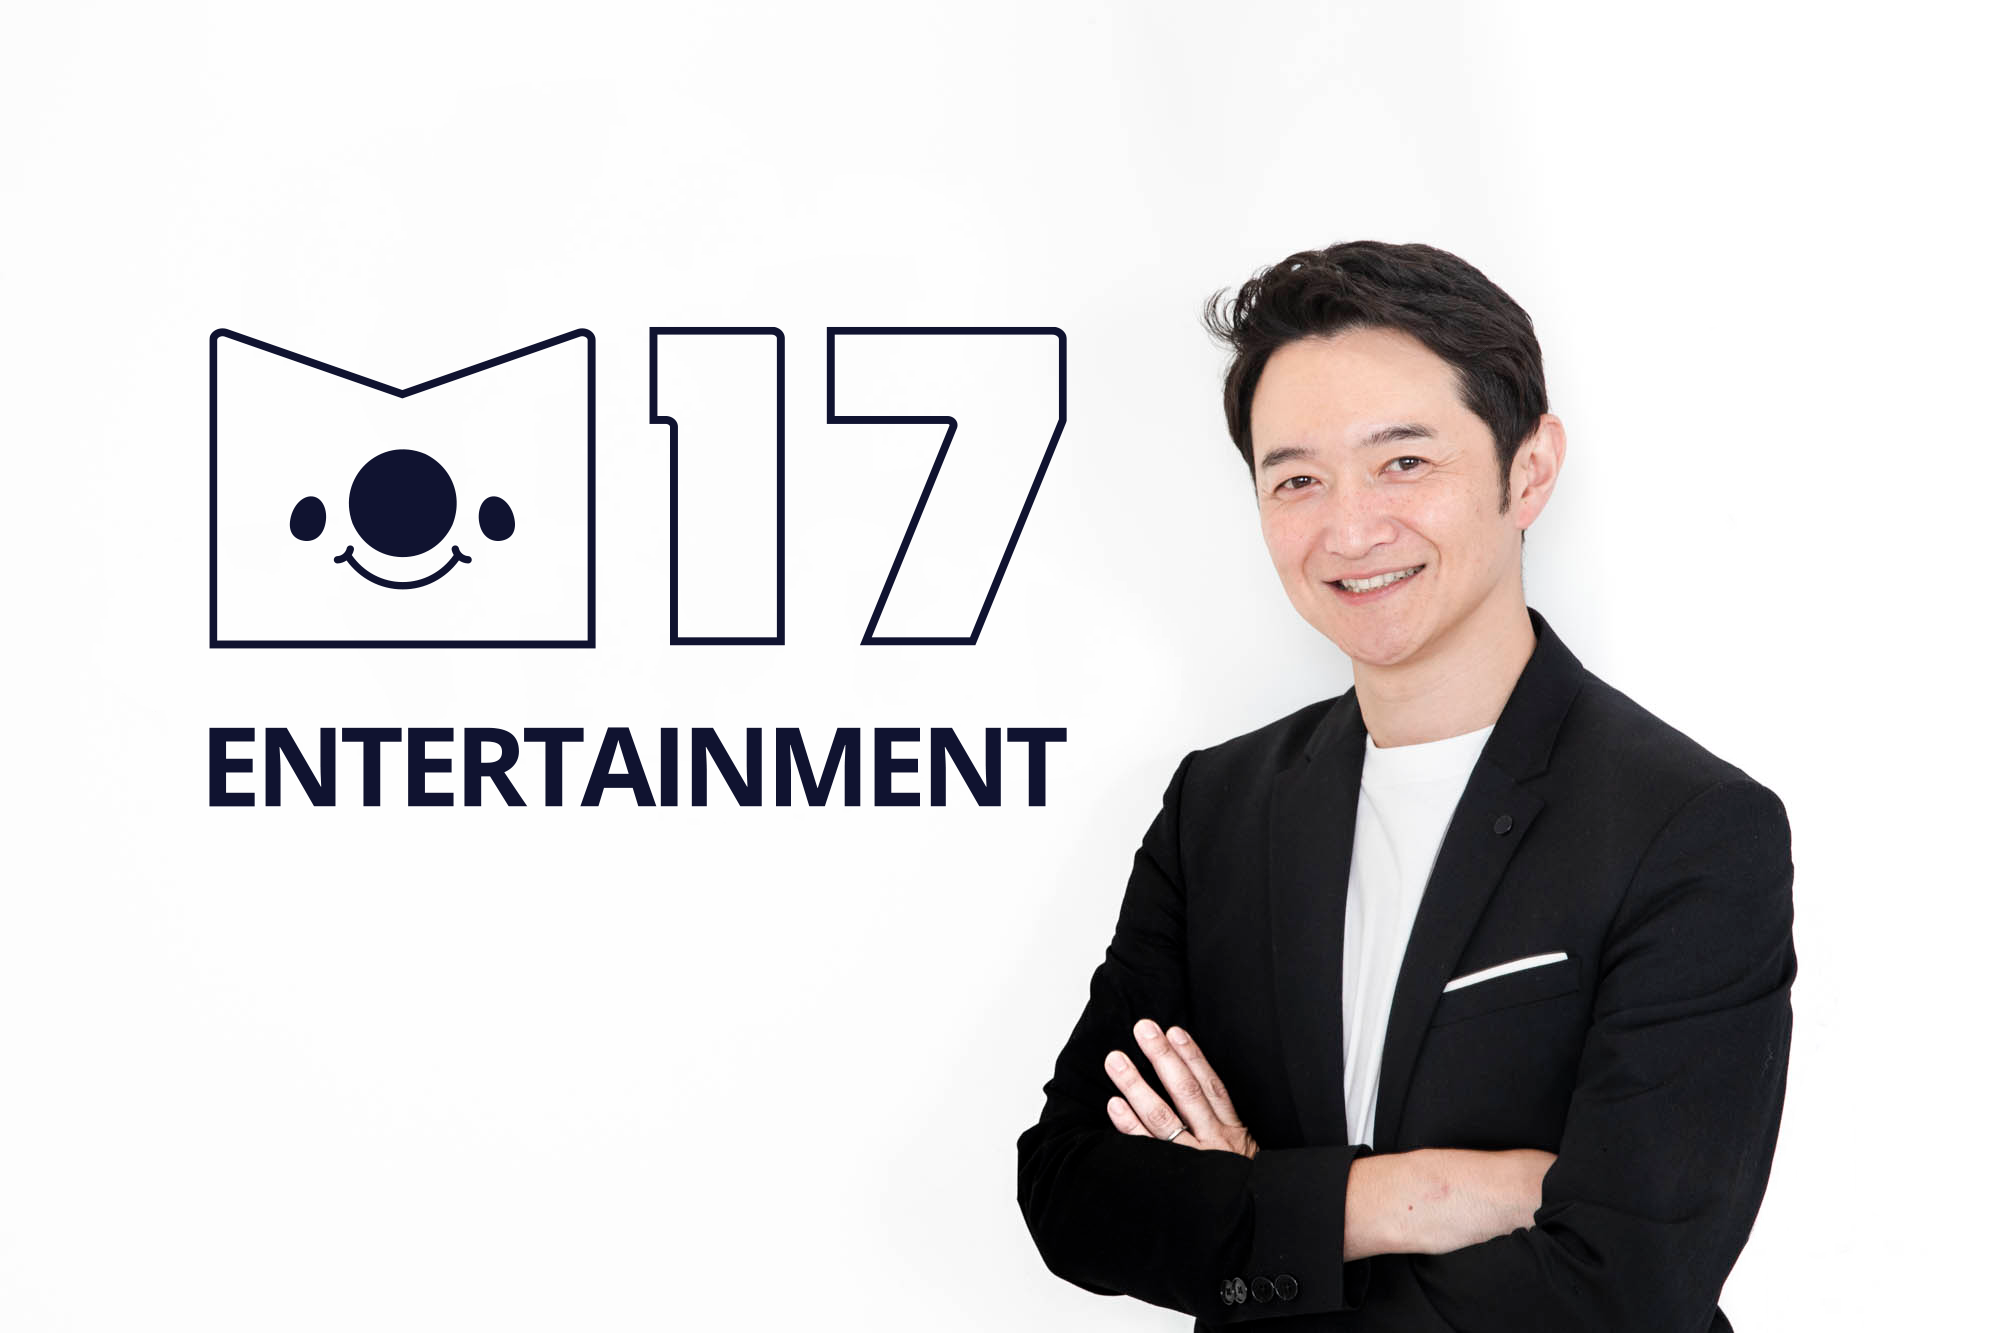 ‘Our platform helps artists to reach an exponentially larger audience’: Q&A with M17 global CEO Hirofumi Ono